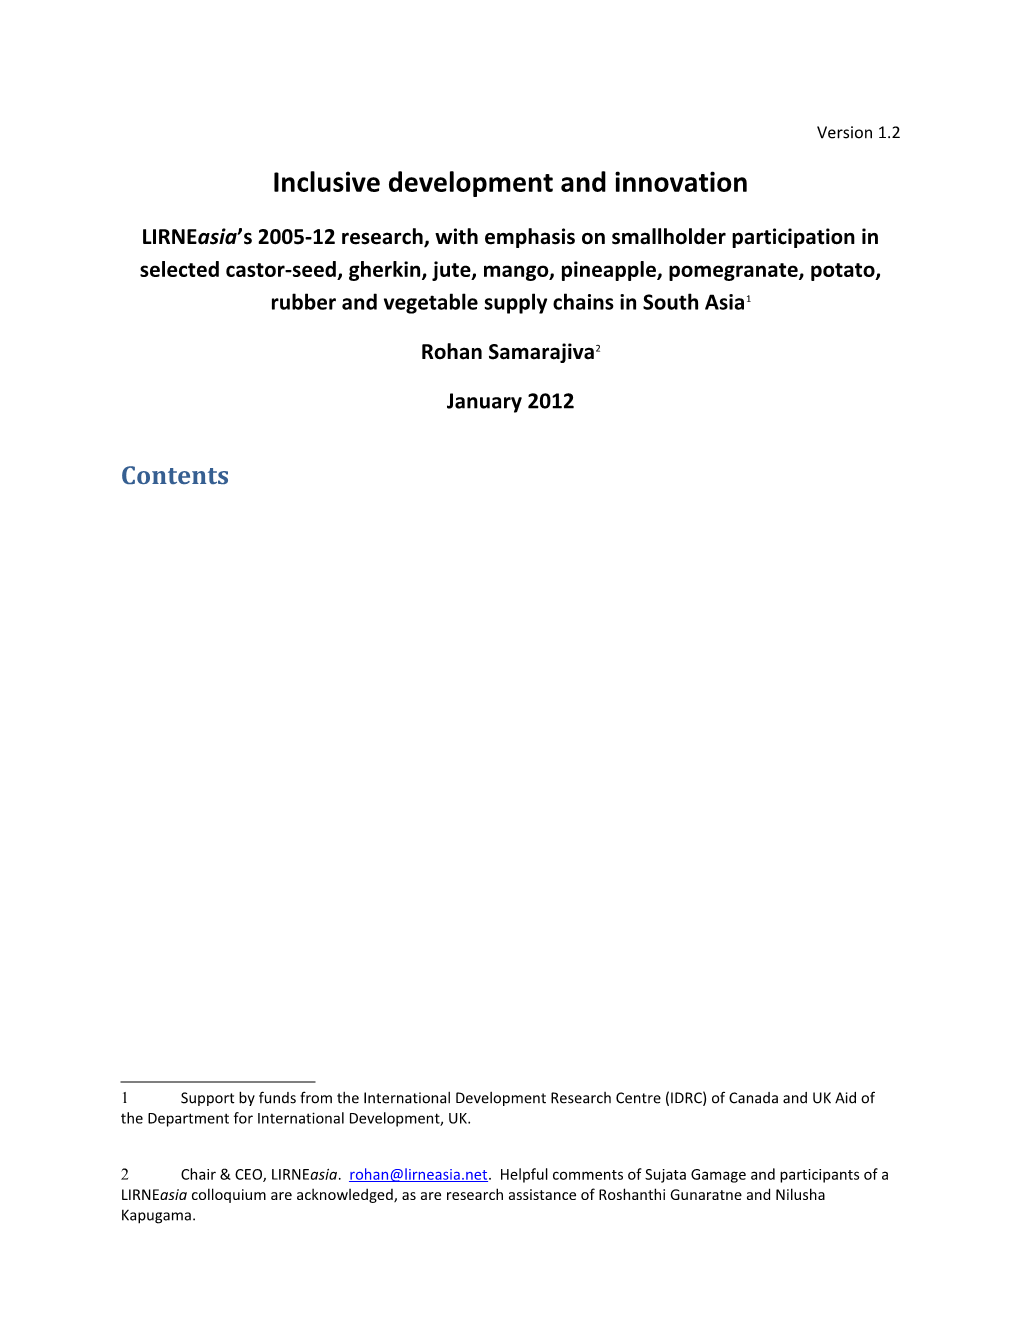 Inclusive Development and Innovation